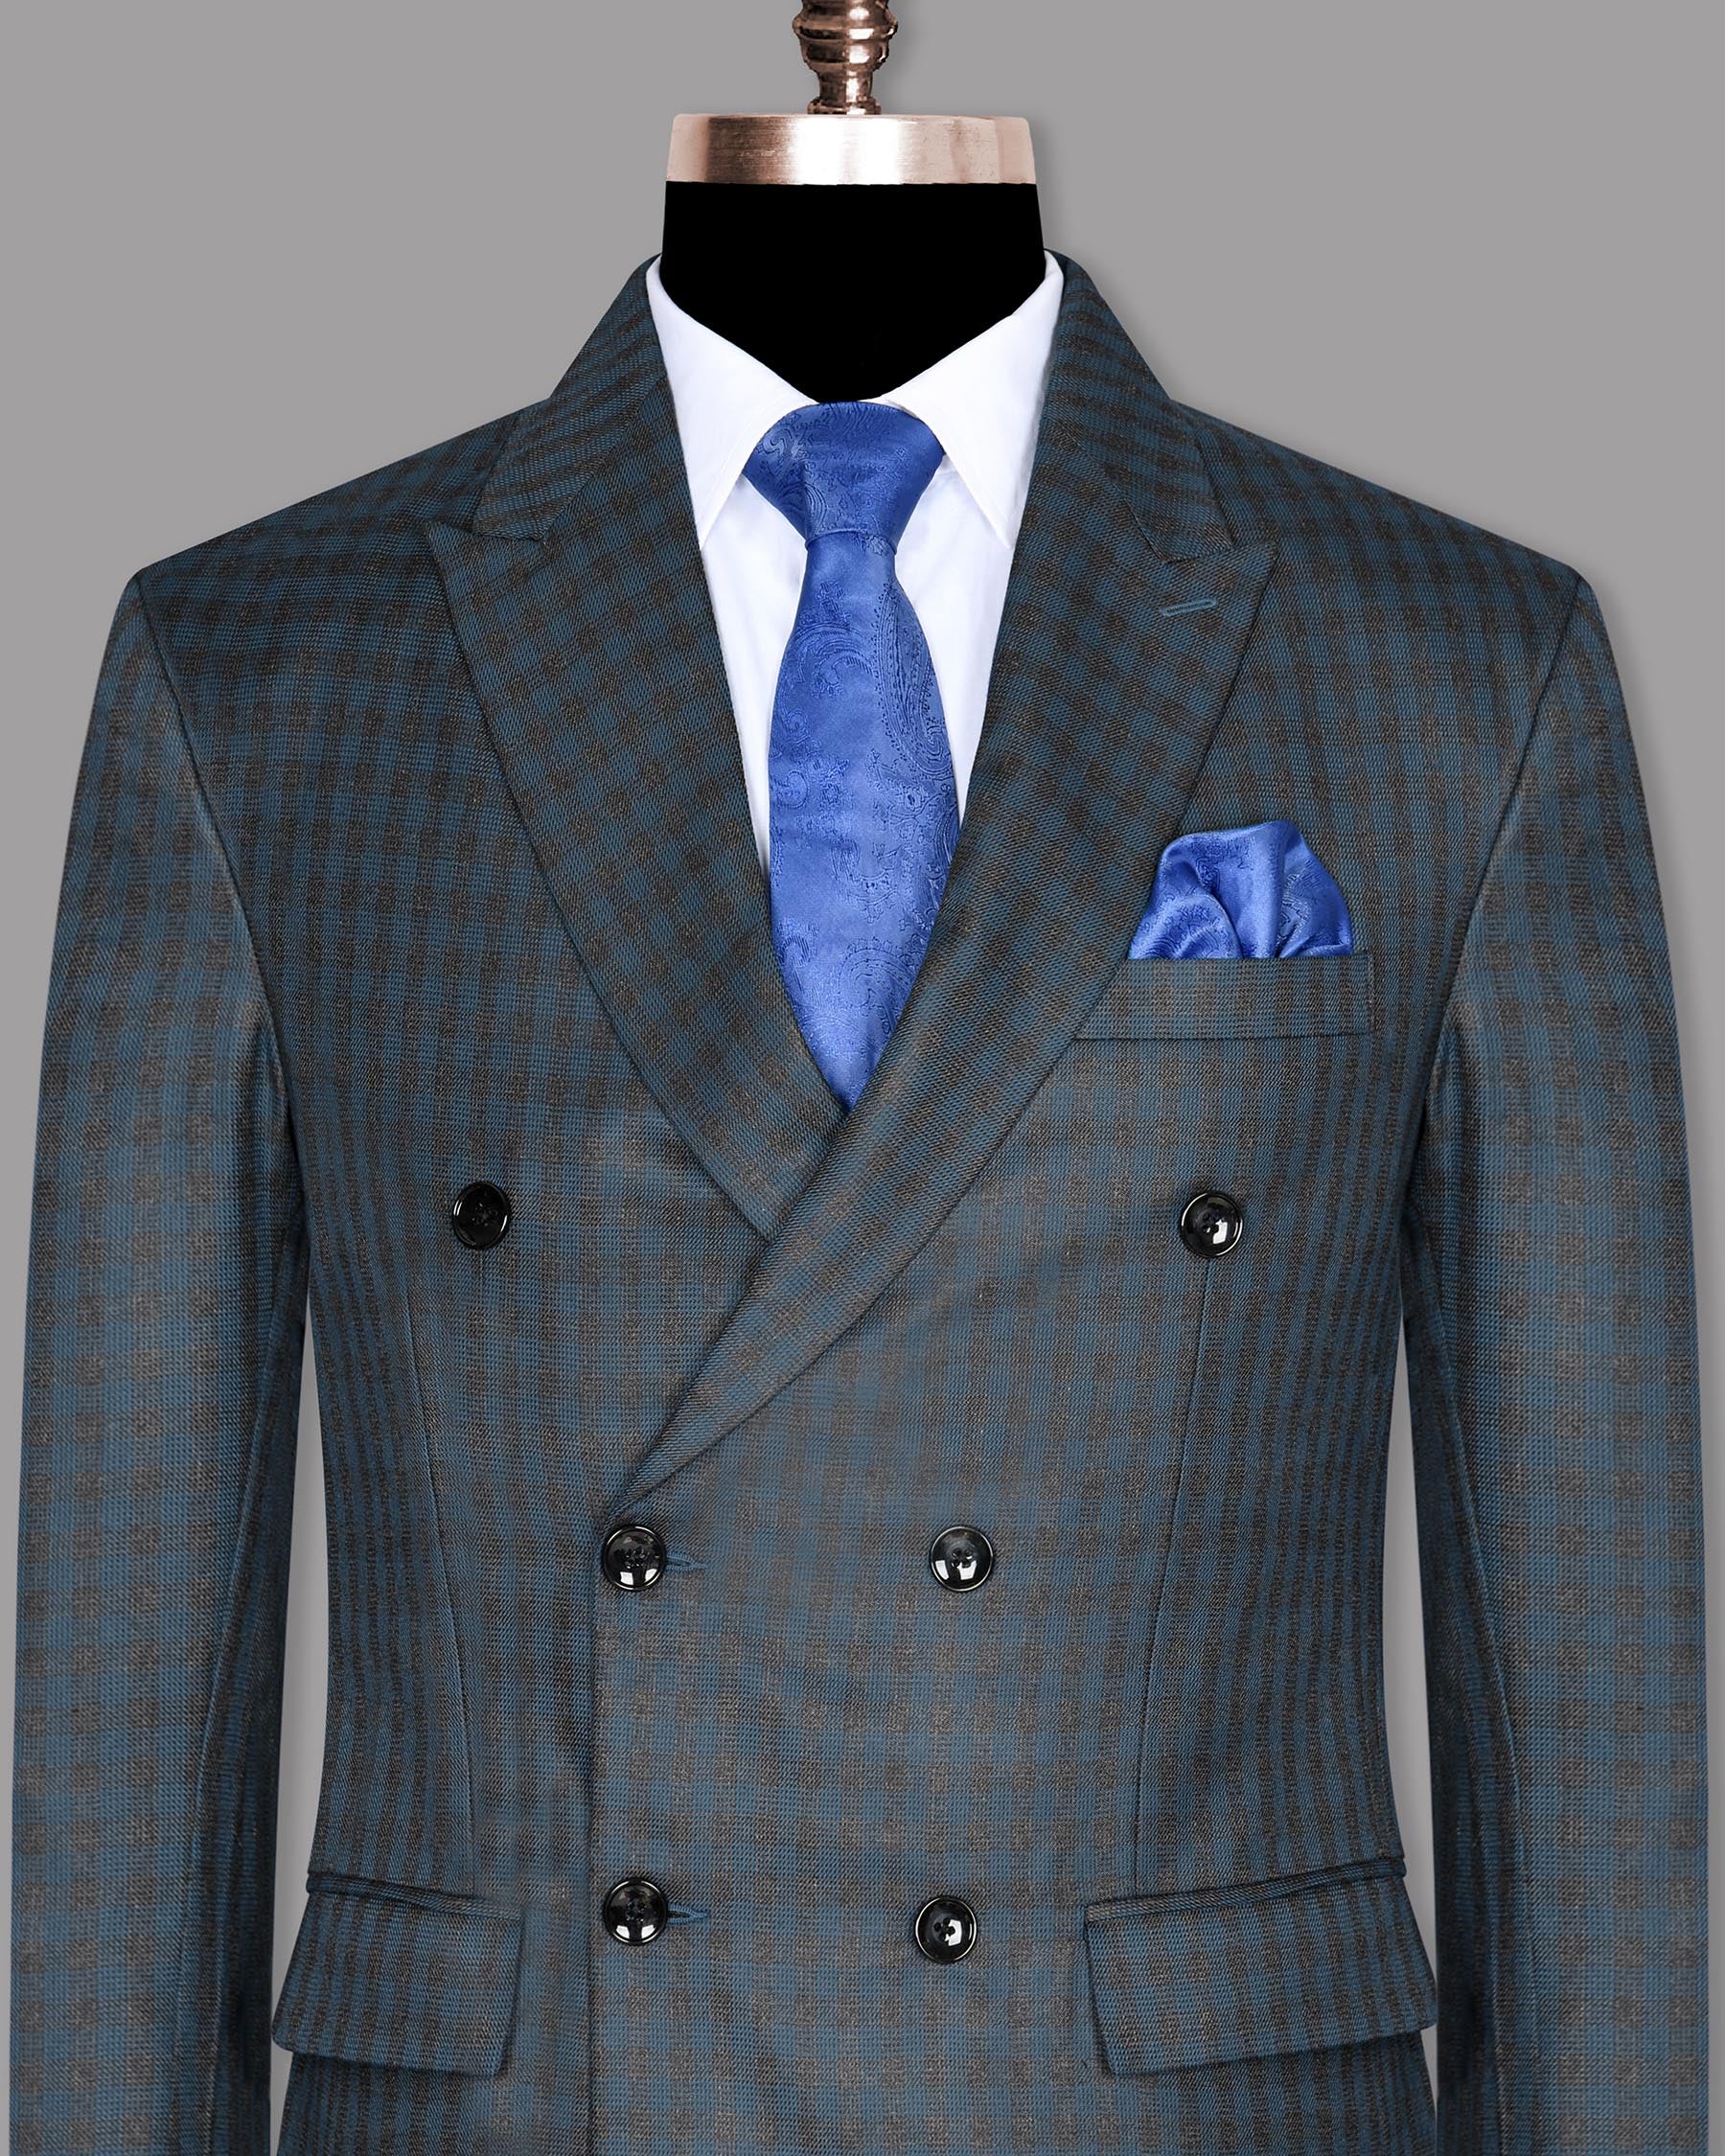 Charcoal with Sapphire Blue Checked Wool Blend Double Breasted Blazer BL708DB-38, BL708DB-42, BL708DB-36, BL708DB-40, BL708DB-44, BL708DB-46, BL708DB-48, BL708DB-54, BL708DB-60, BL708DB-58, BL708DB-50, BL708DB-52, BL708DB-56